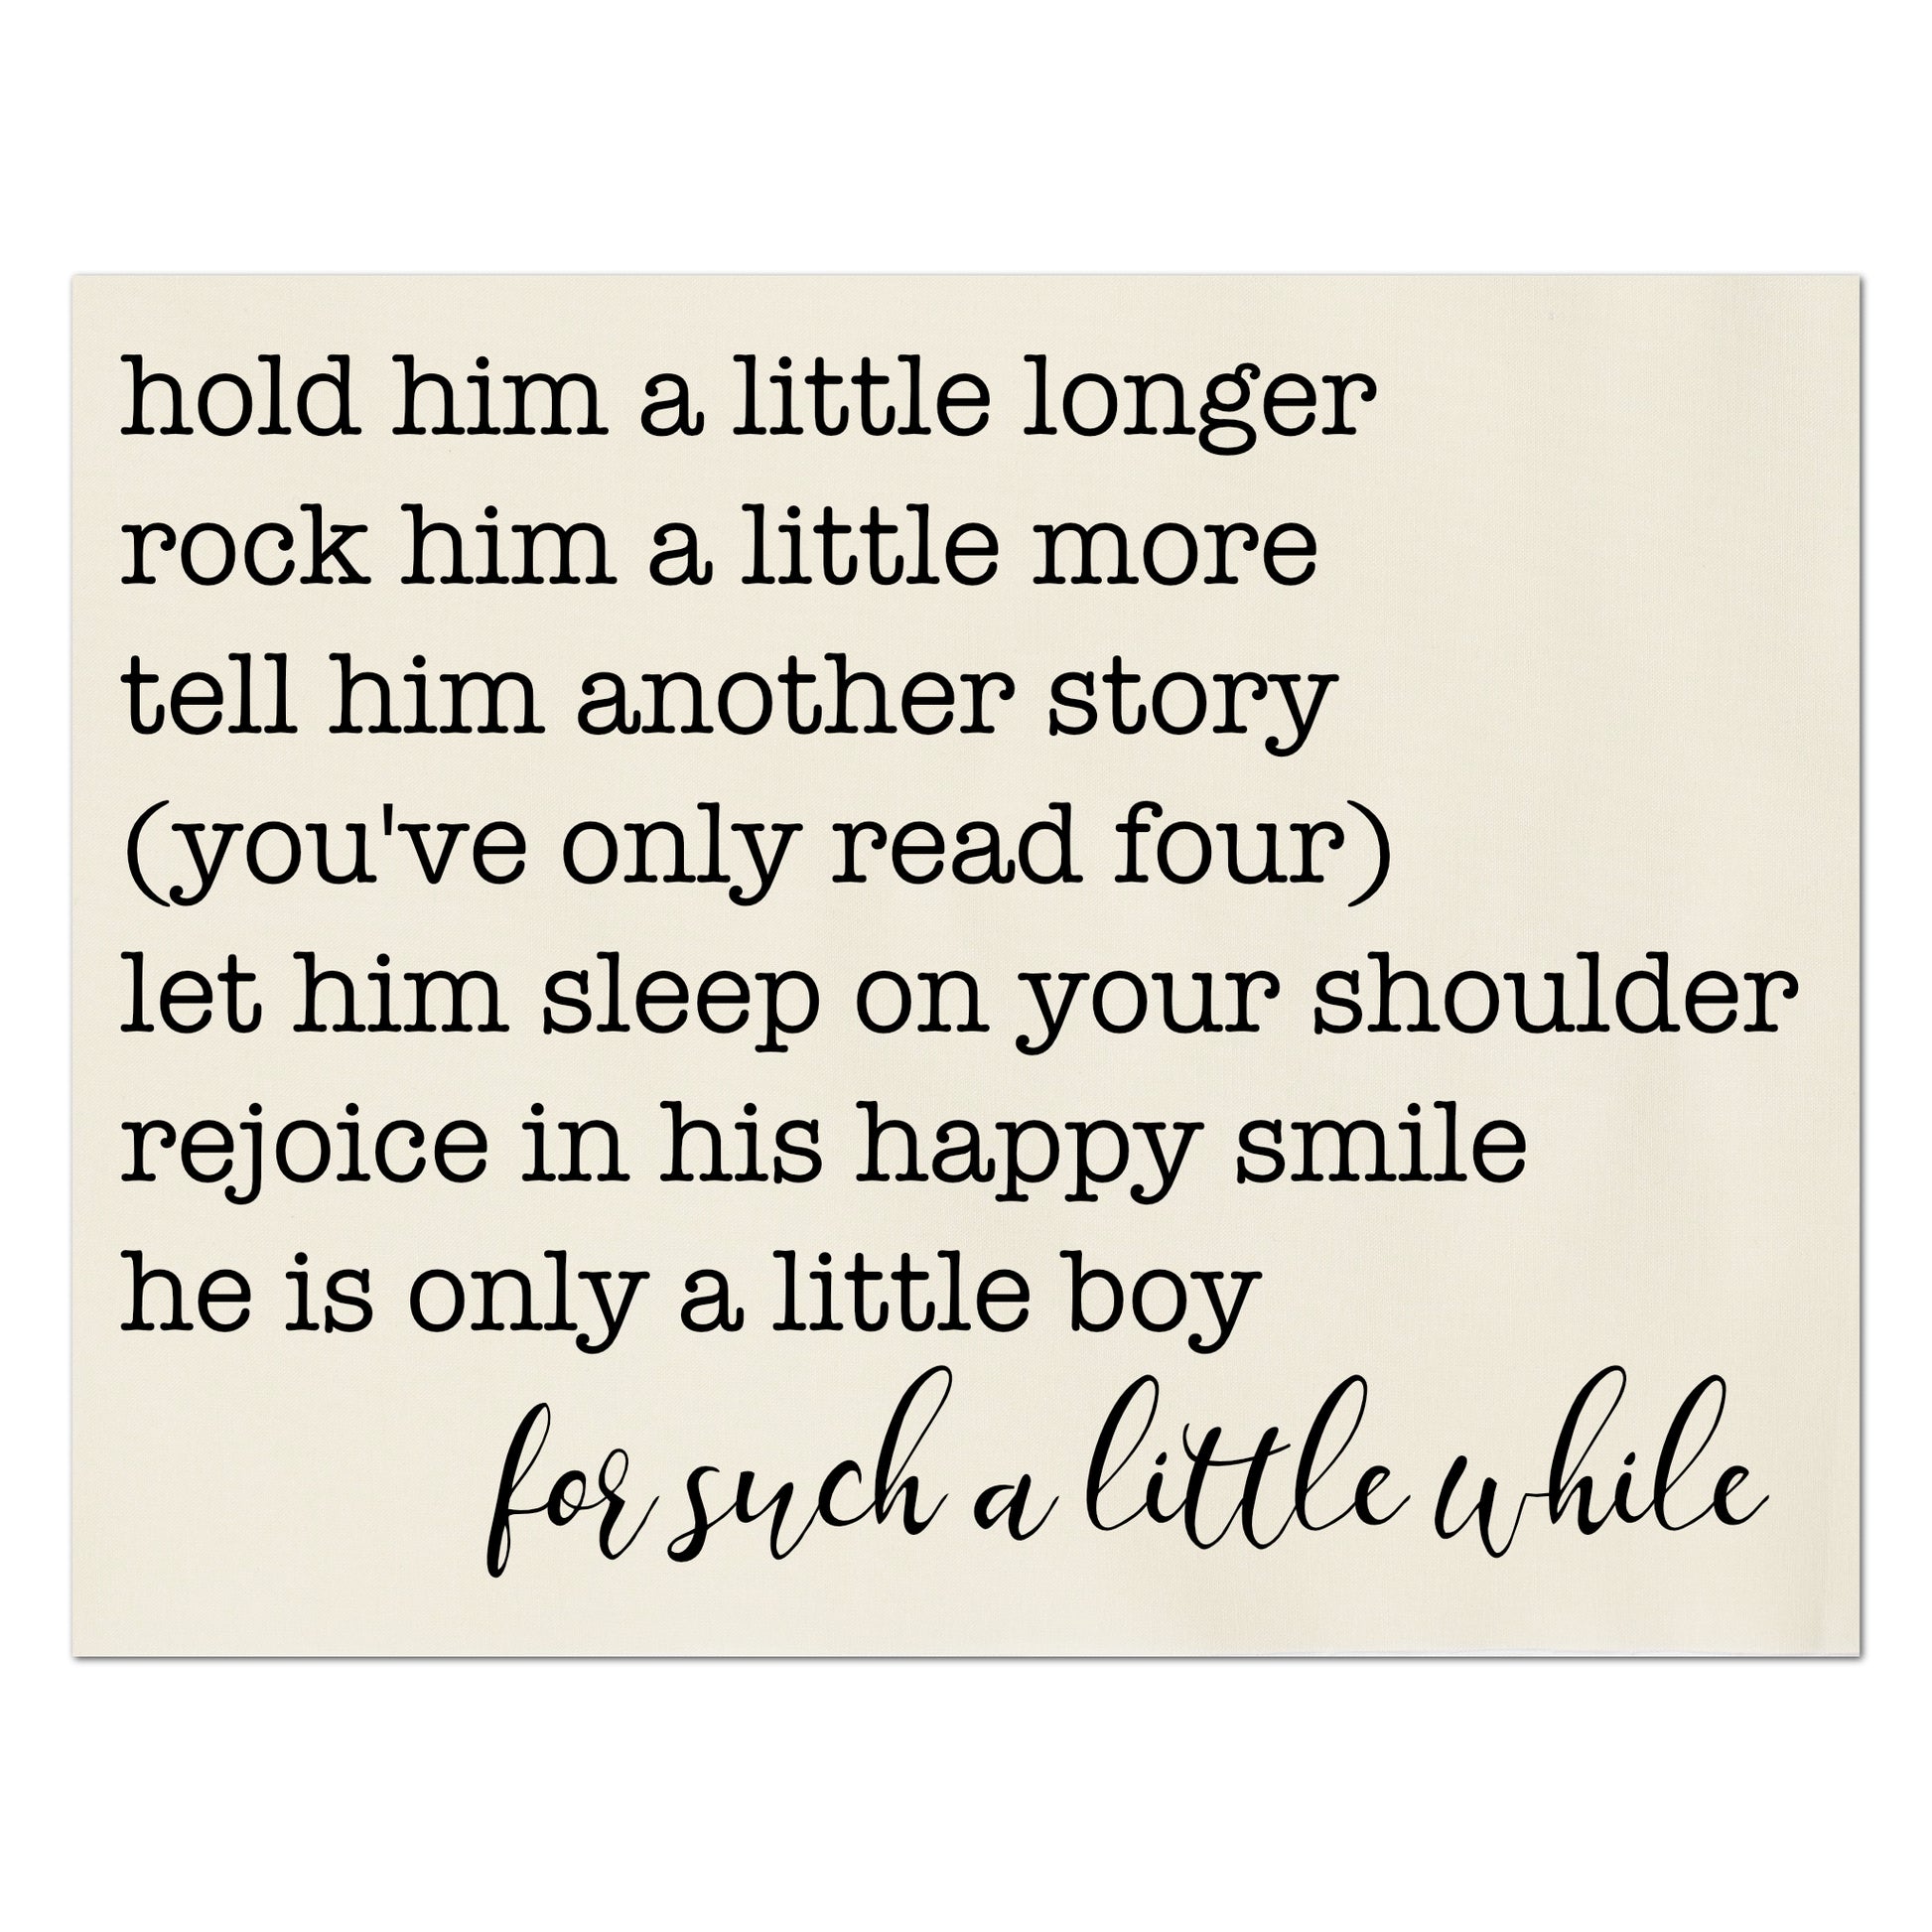 Hold him a little longer, rock him a little more, tell him another story, you've only read four), let him sleep on your shoulder, rejoice in his happy simile, he is only a little boy, for such a little while - Baby Fabric Panel